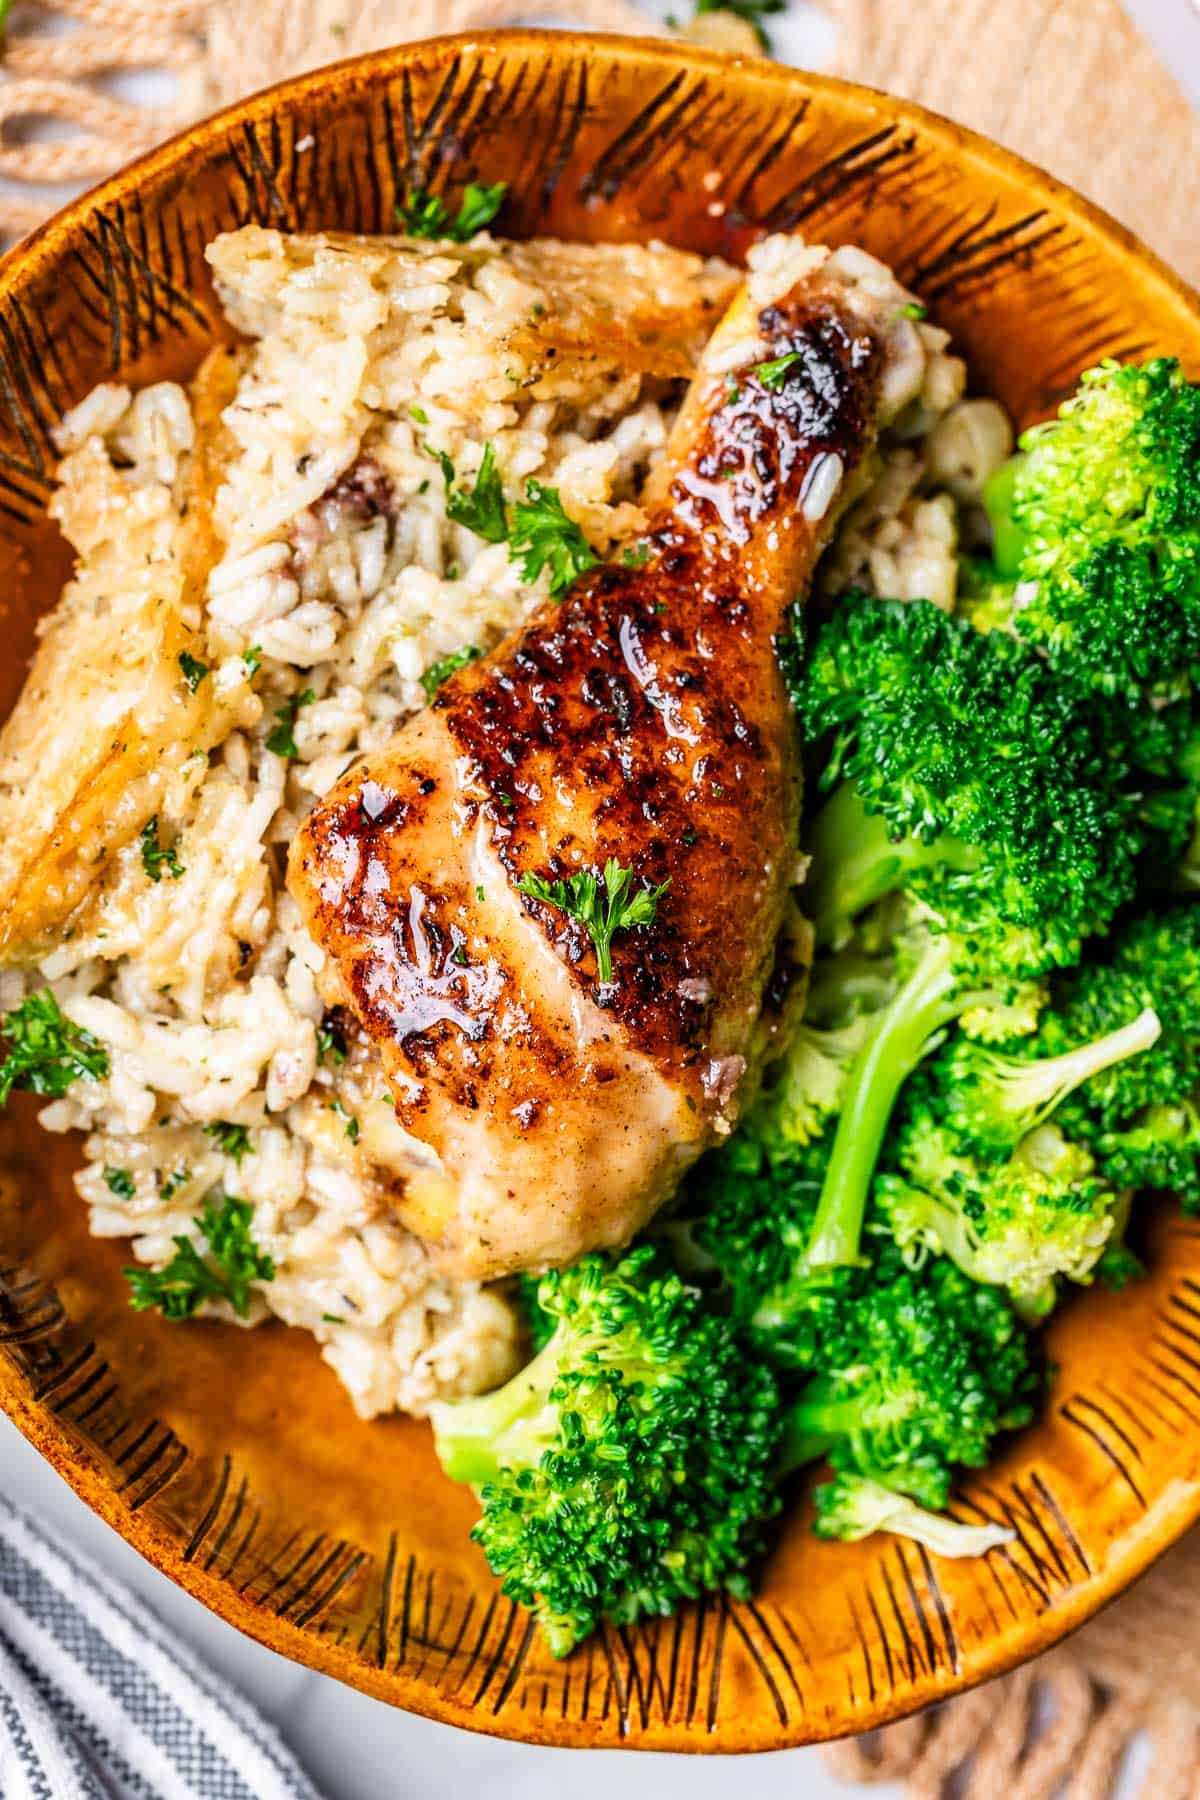 creamy rice, cooked chicken drumstick, and broccoli in a ceramic bowl.